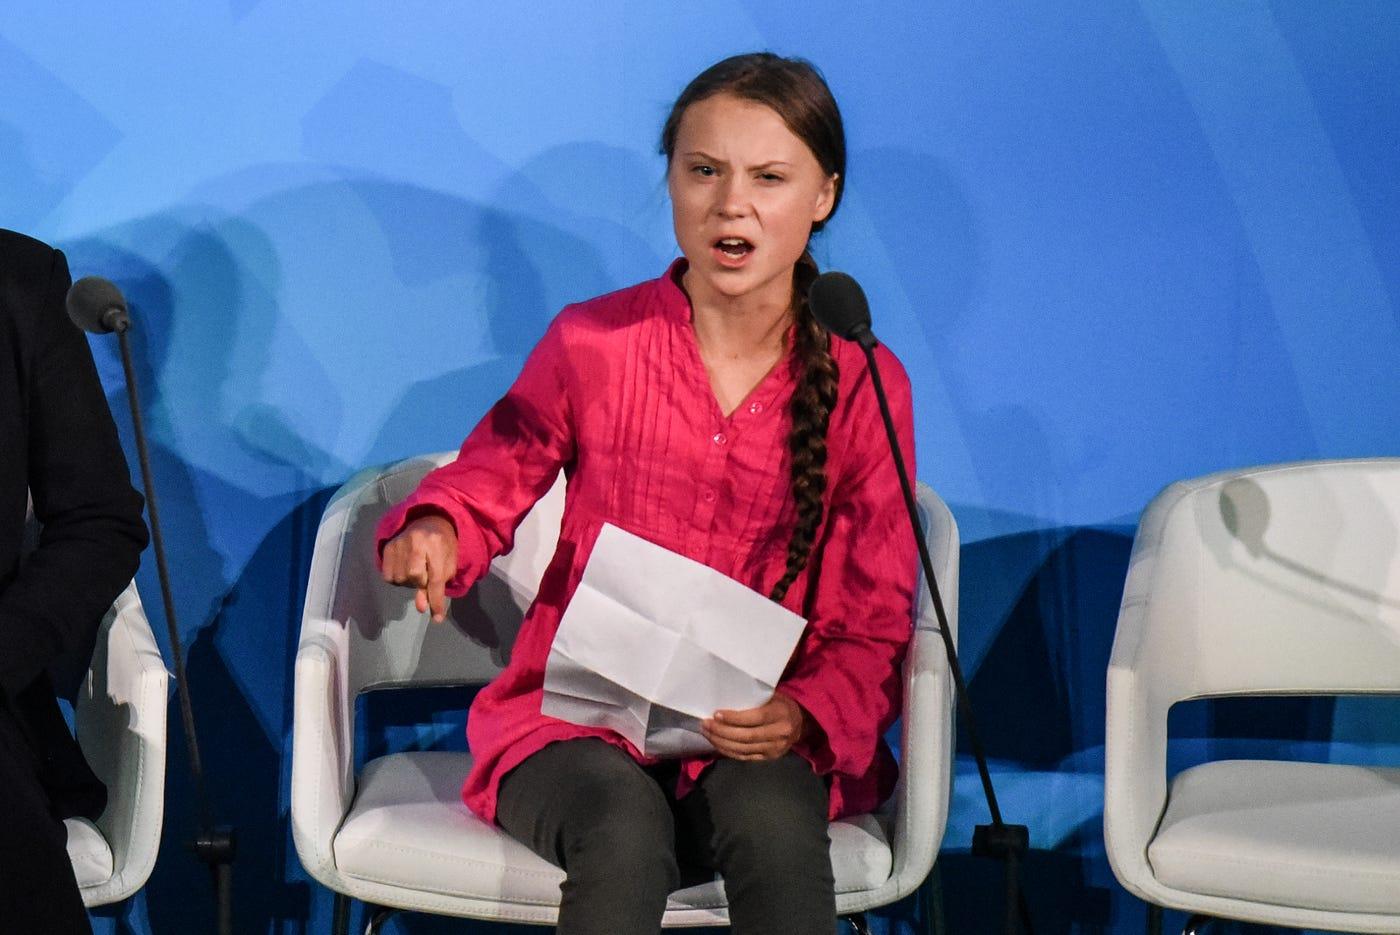 A photo of Greta Thunberg at the Climate Action Summit.